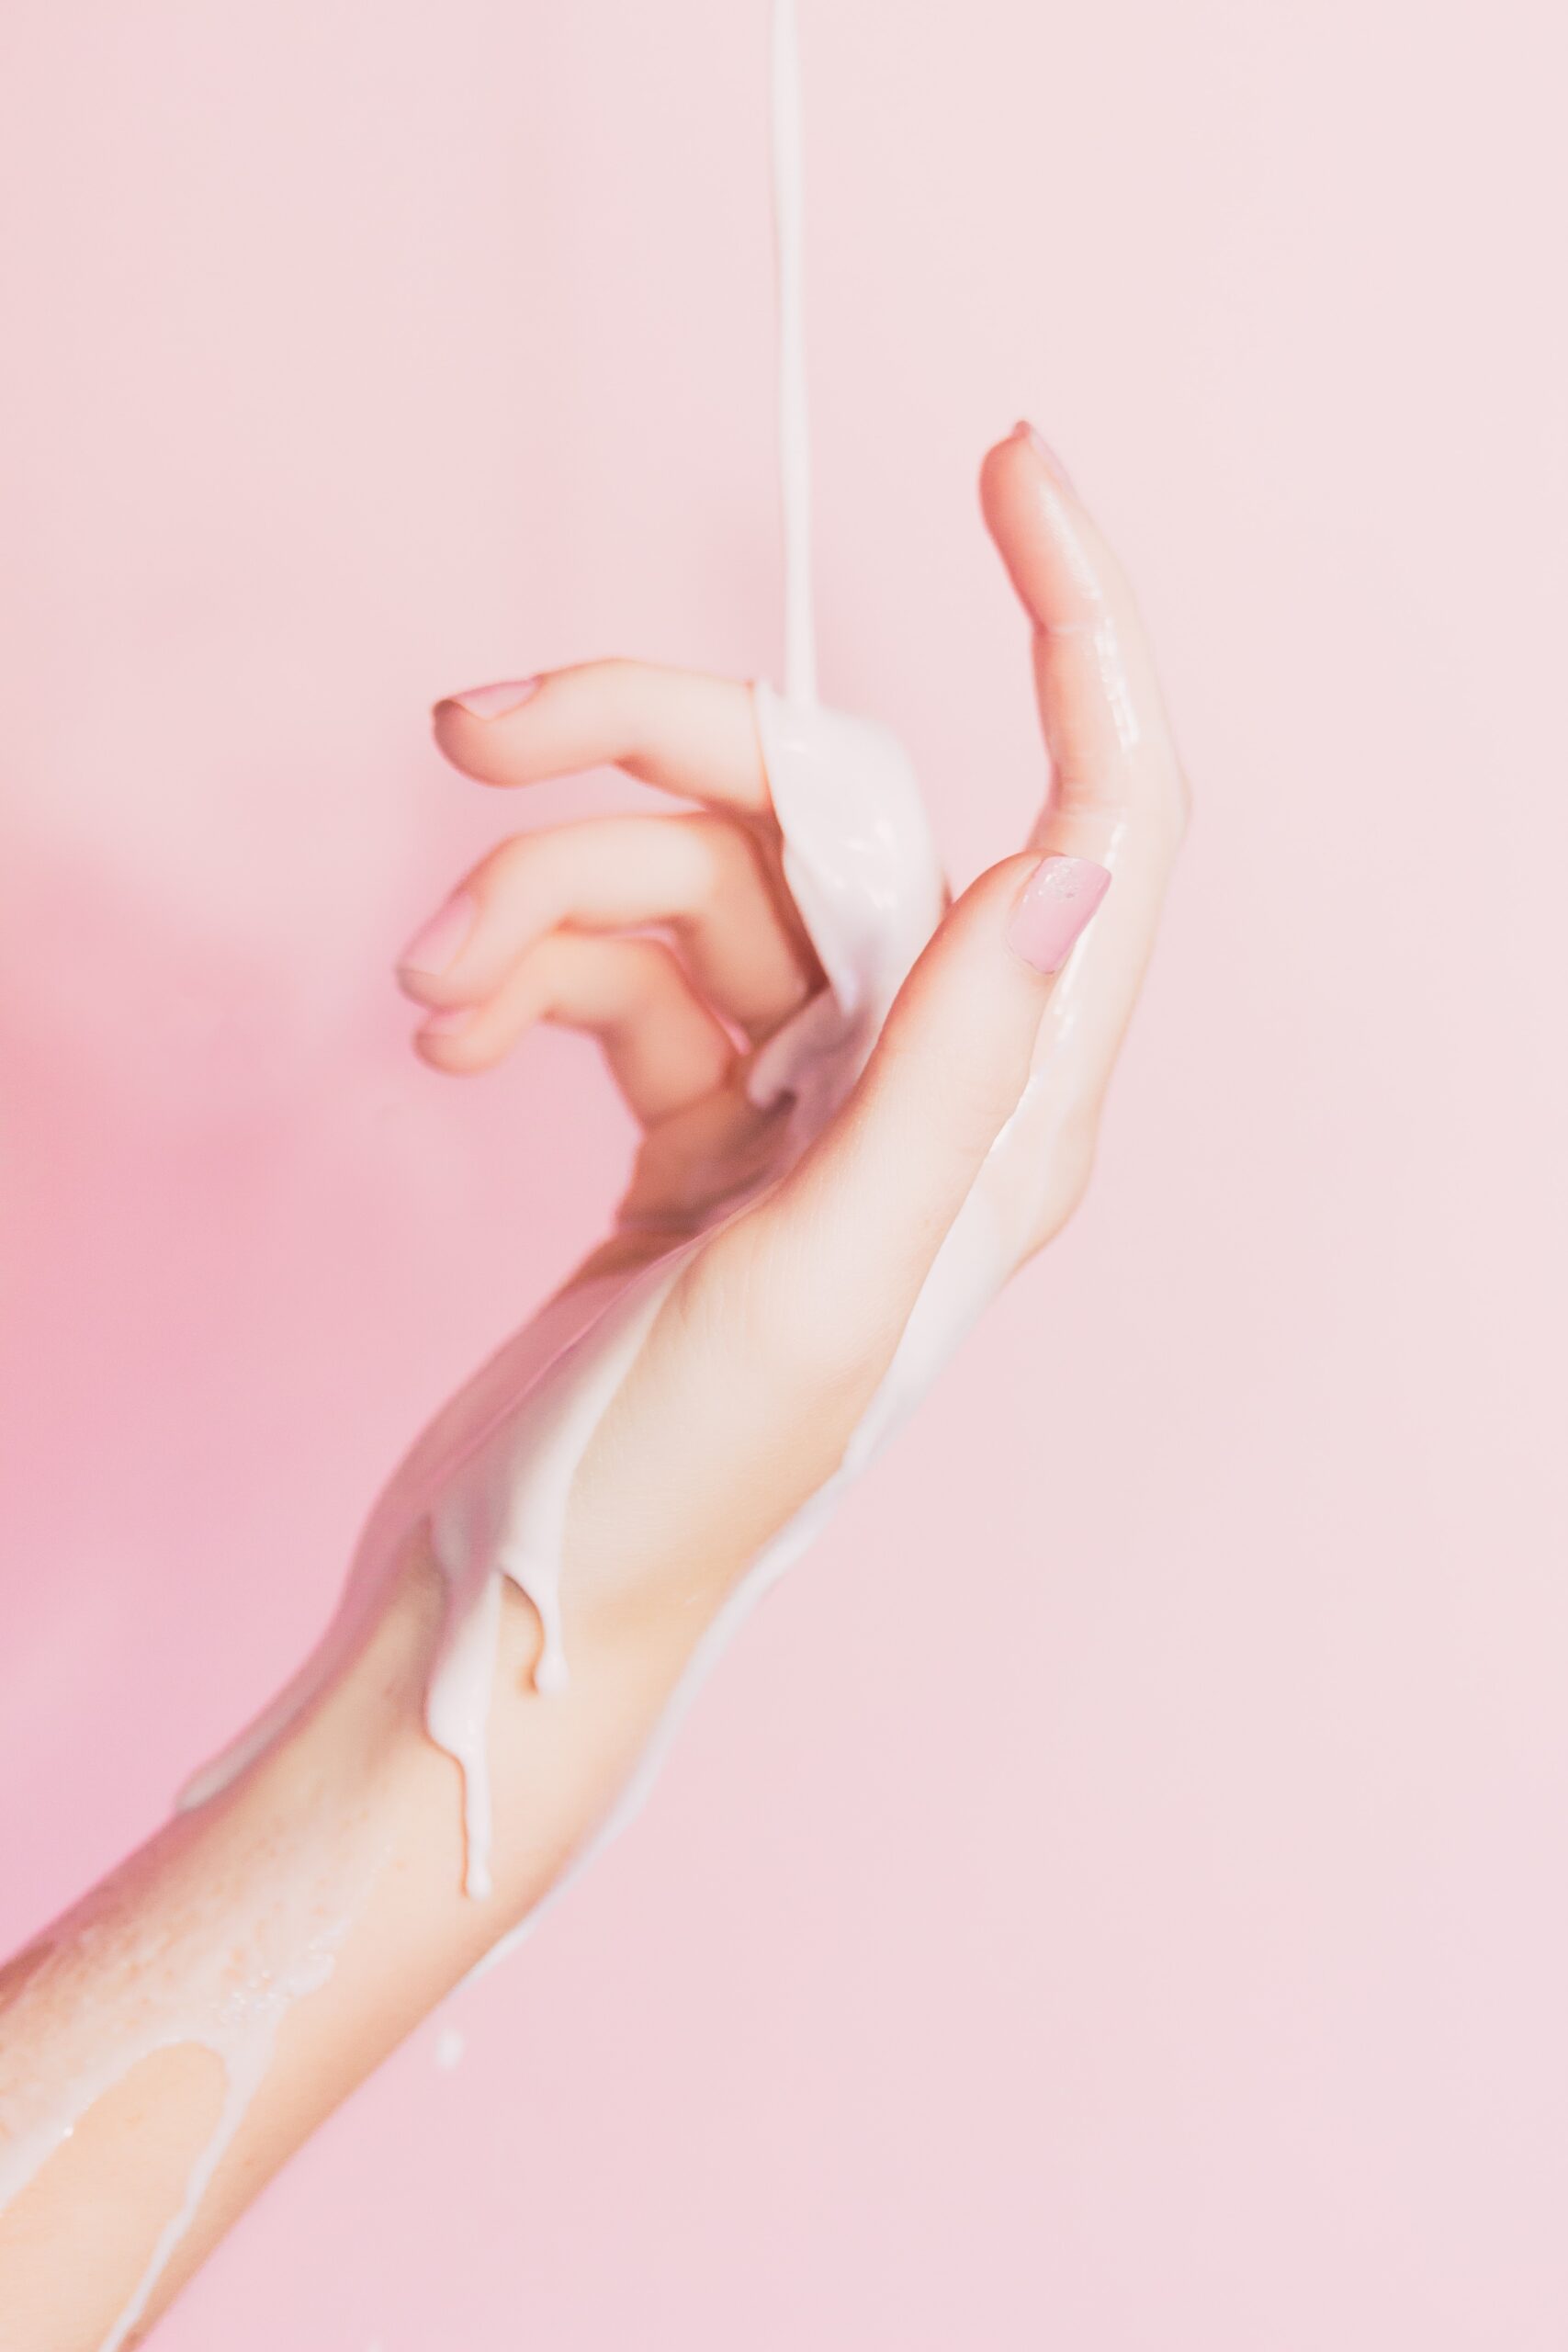 The 5 Best Types of Nail Polish Remover